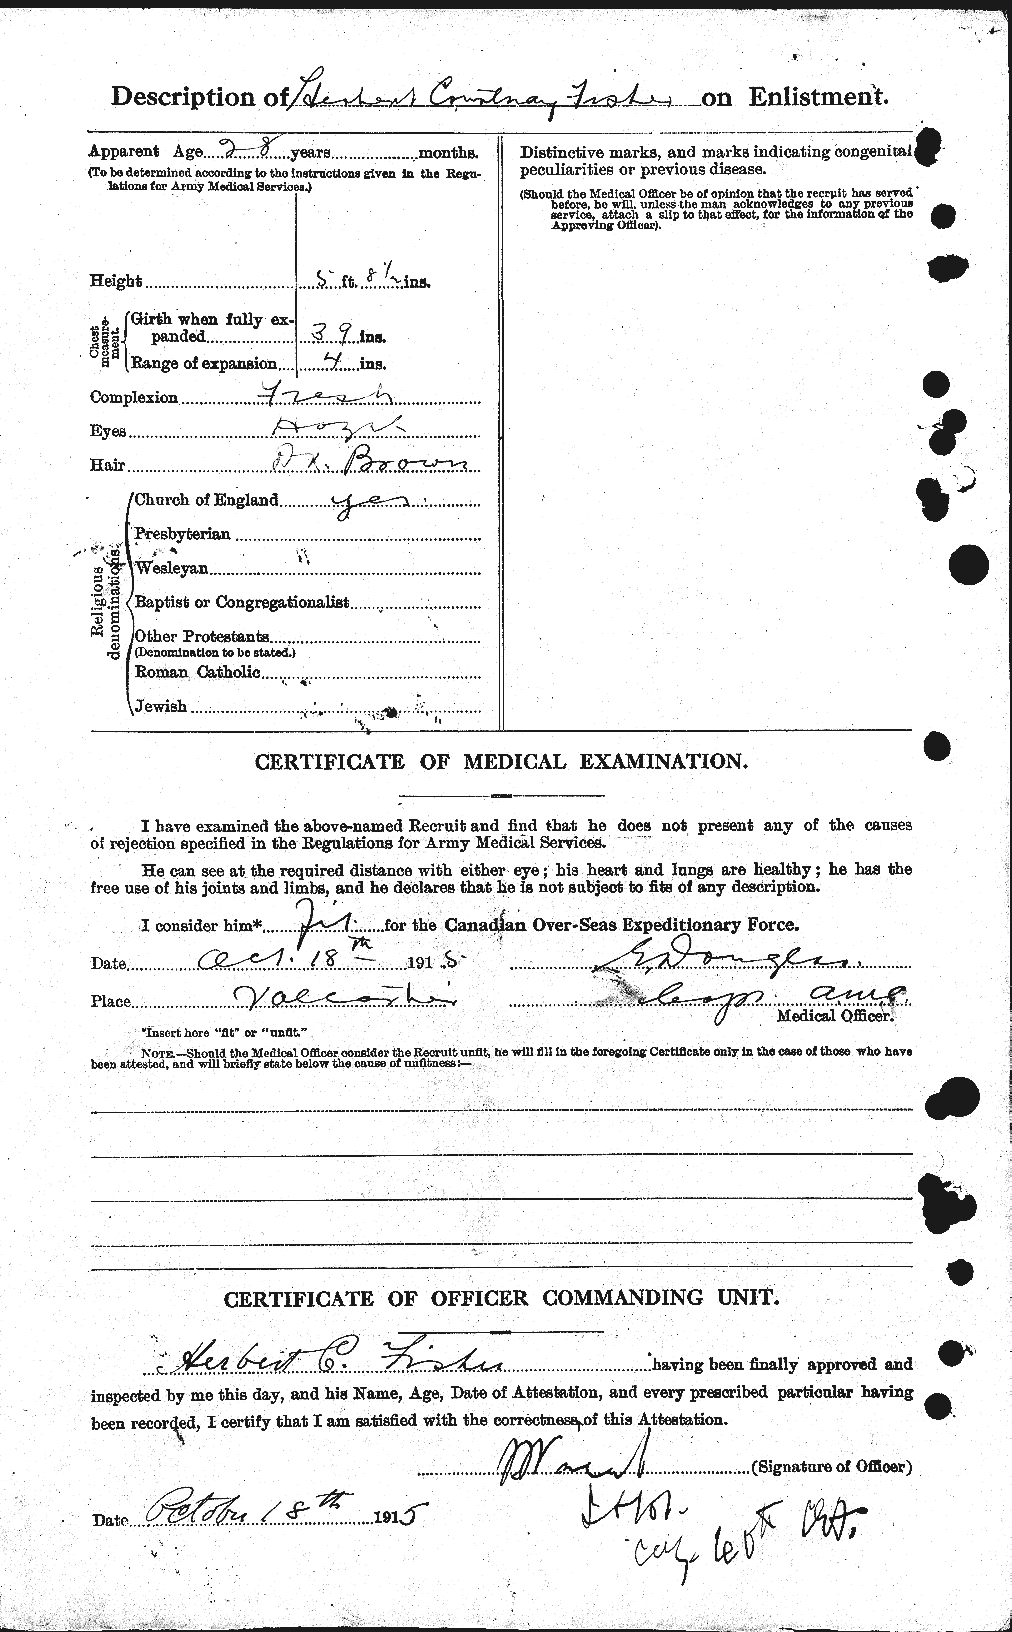 Personnel Records of the First World War - CEF 325994b